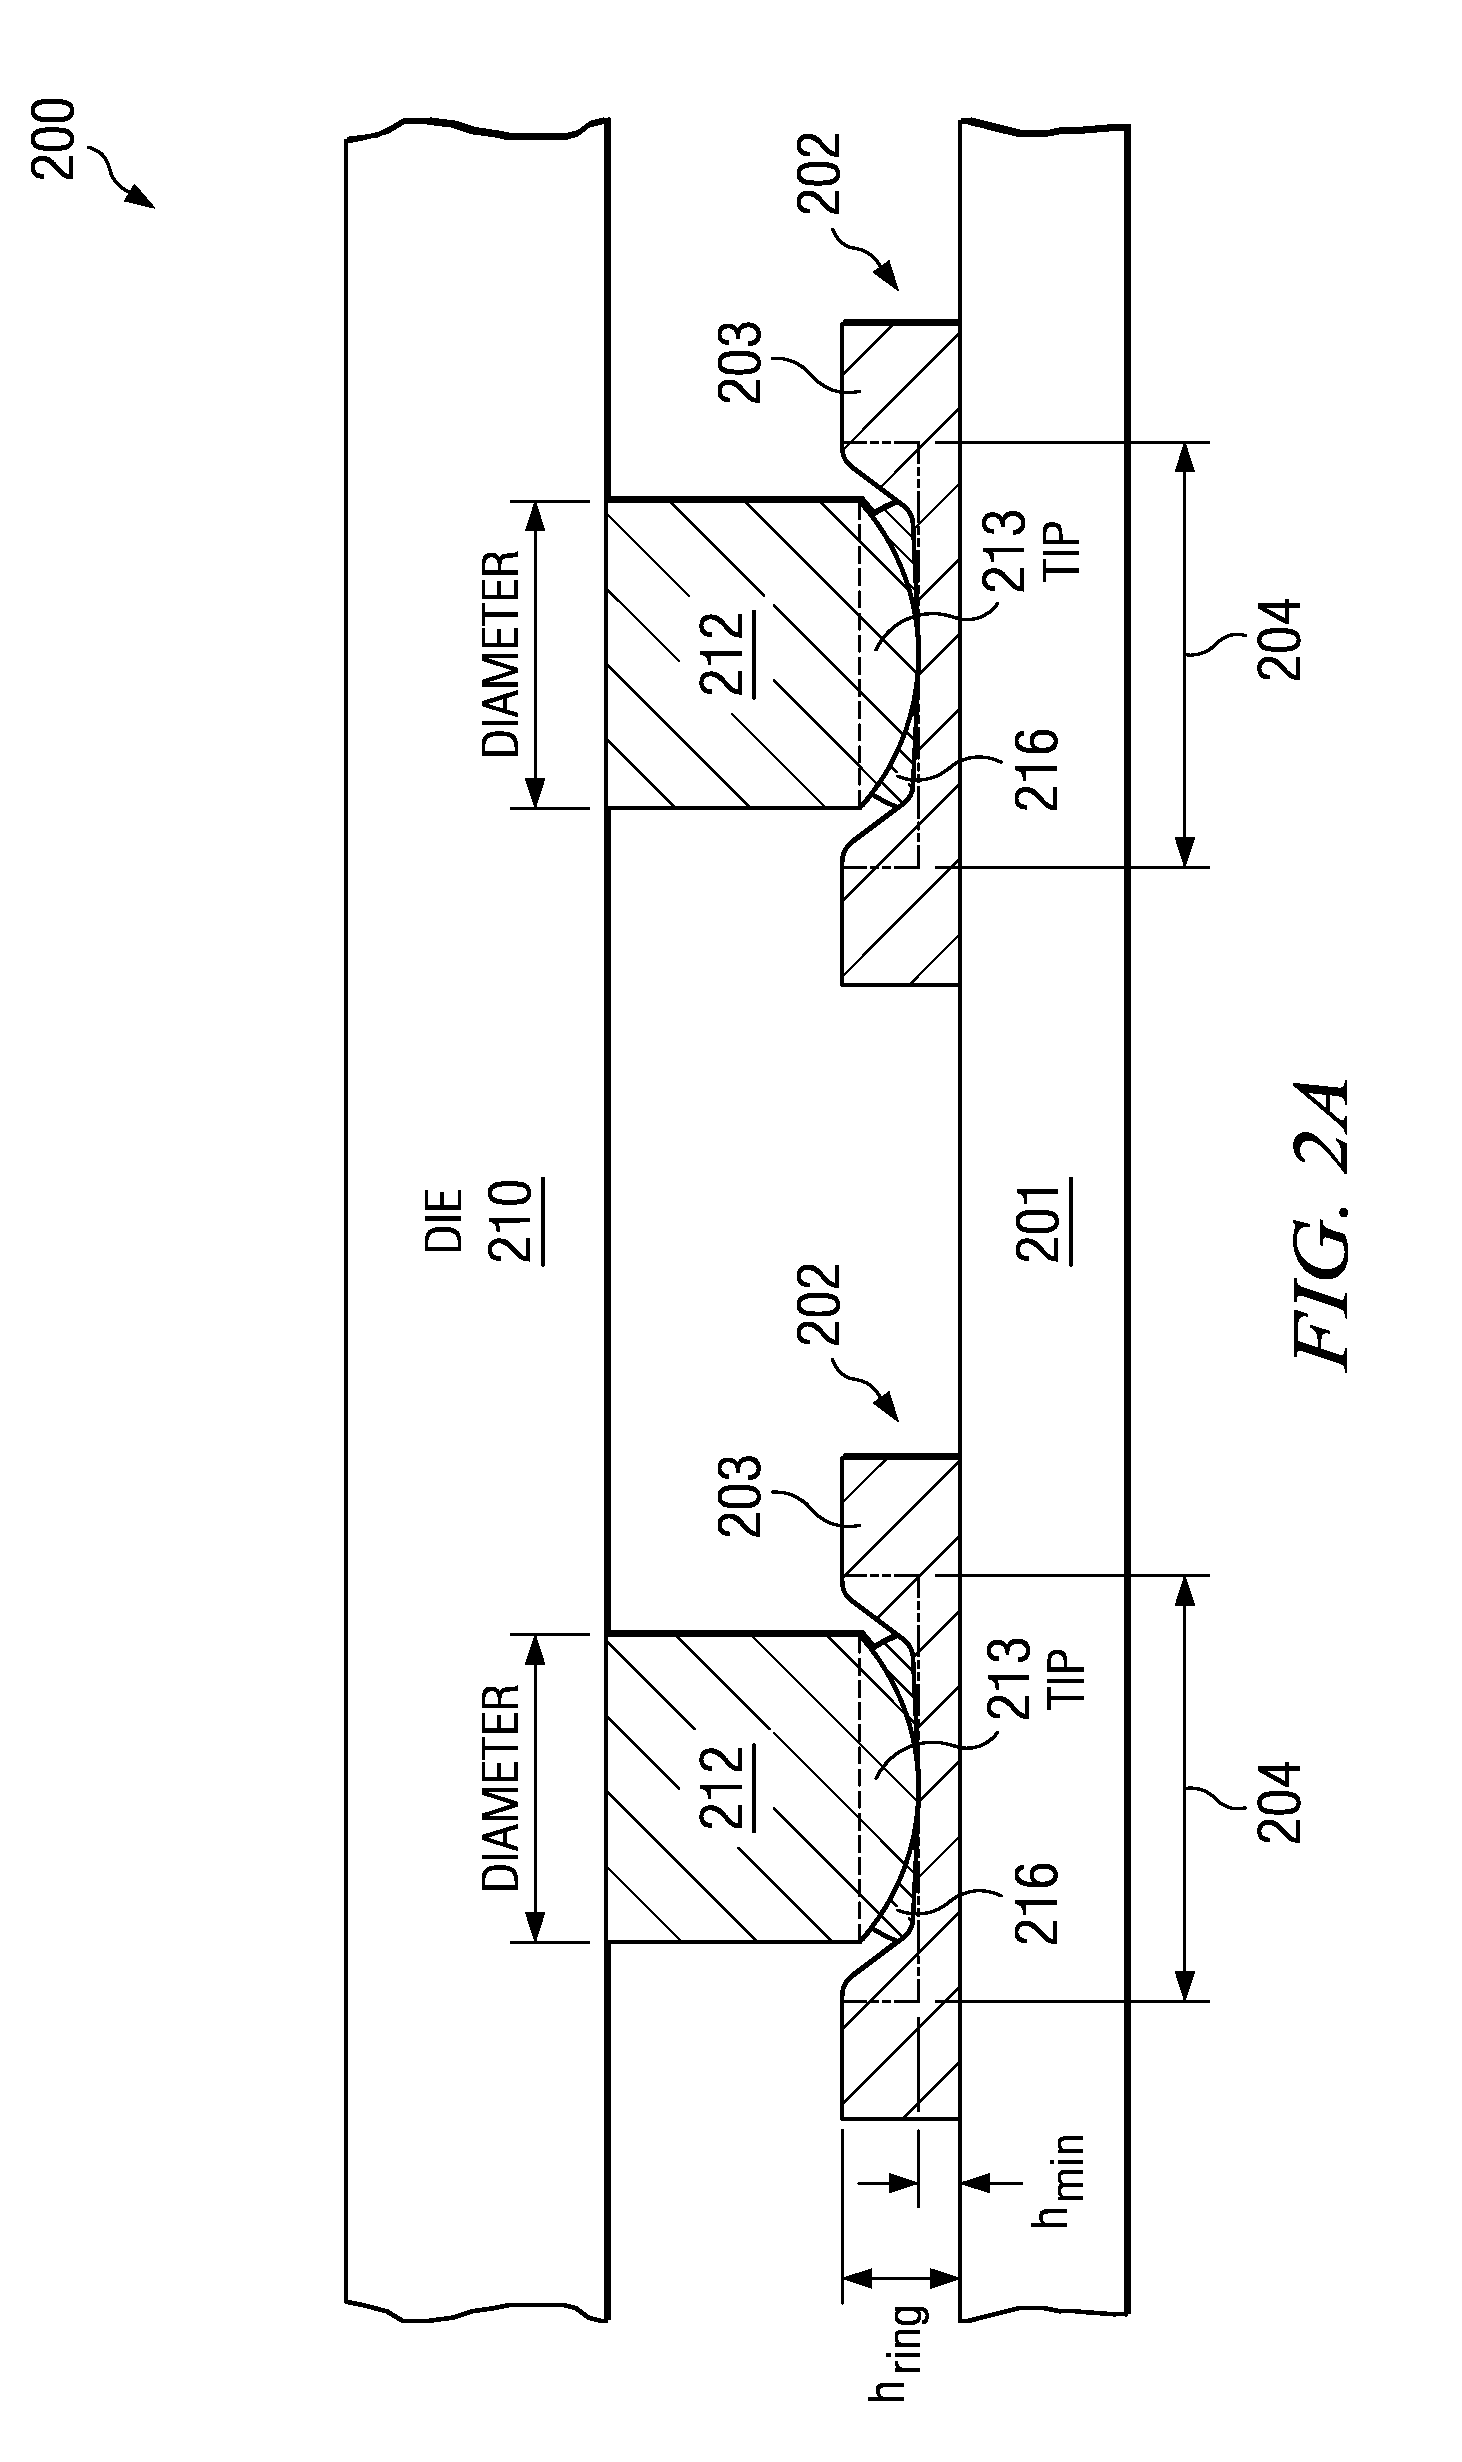 Workpiece contact pads with elevated ring for restricting horizontal movement of terminals of IC during pressing